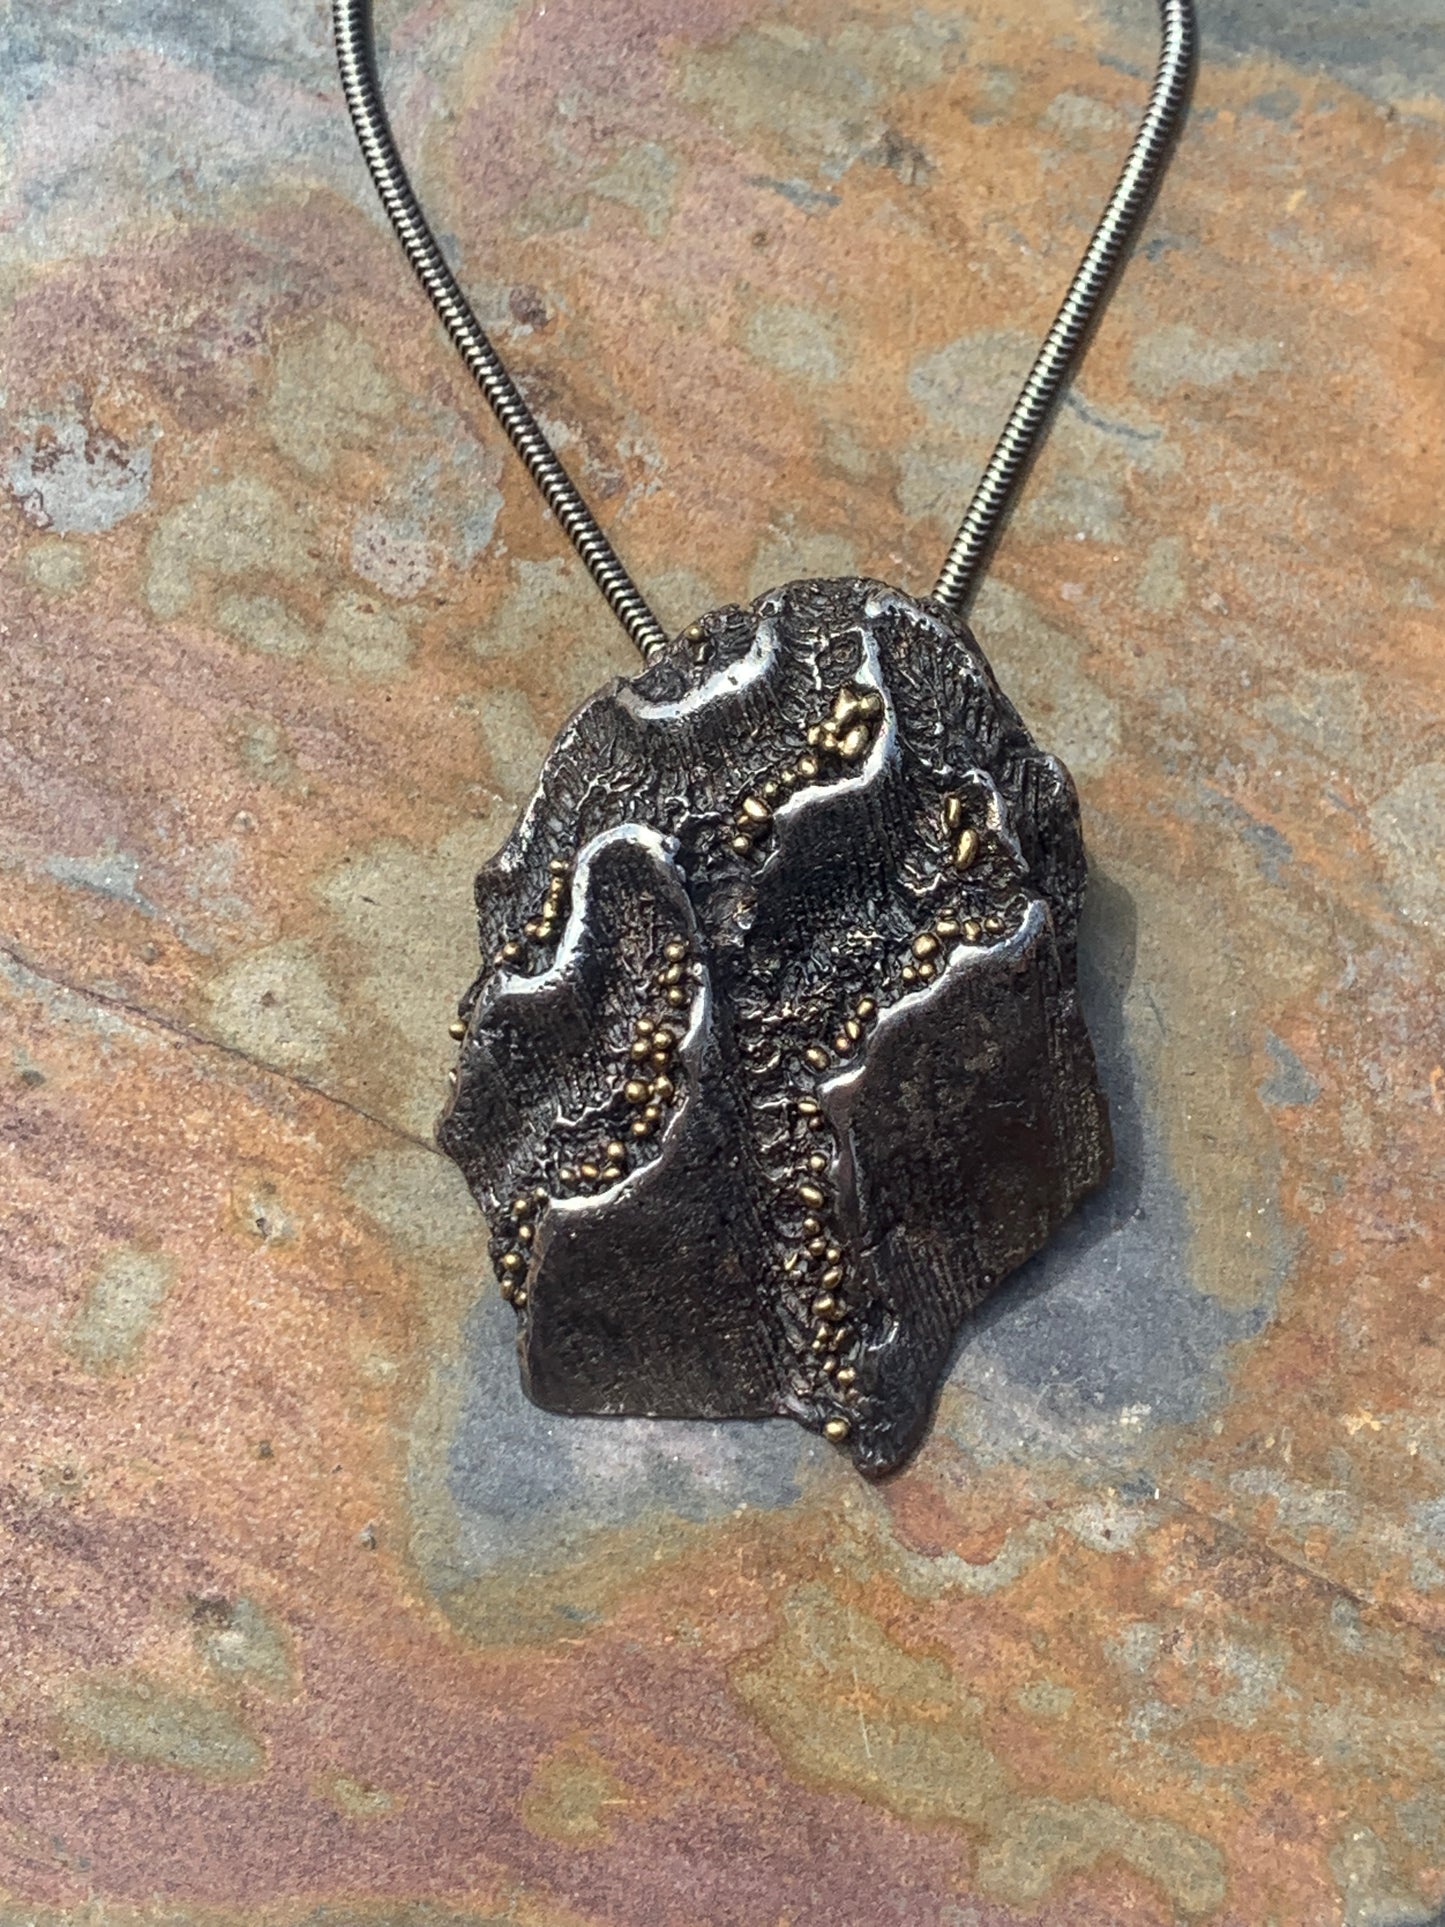 2023 - "Uplift" Brain Coral Casting Pendant with 18k granulation by Jenn Dewey - FAIRMINED Silver & Gold